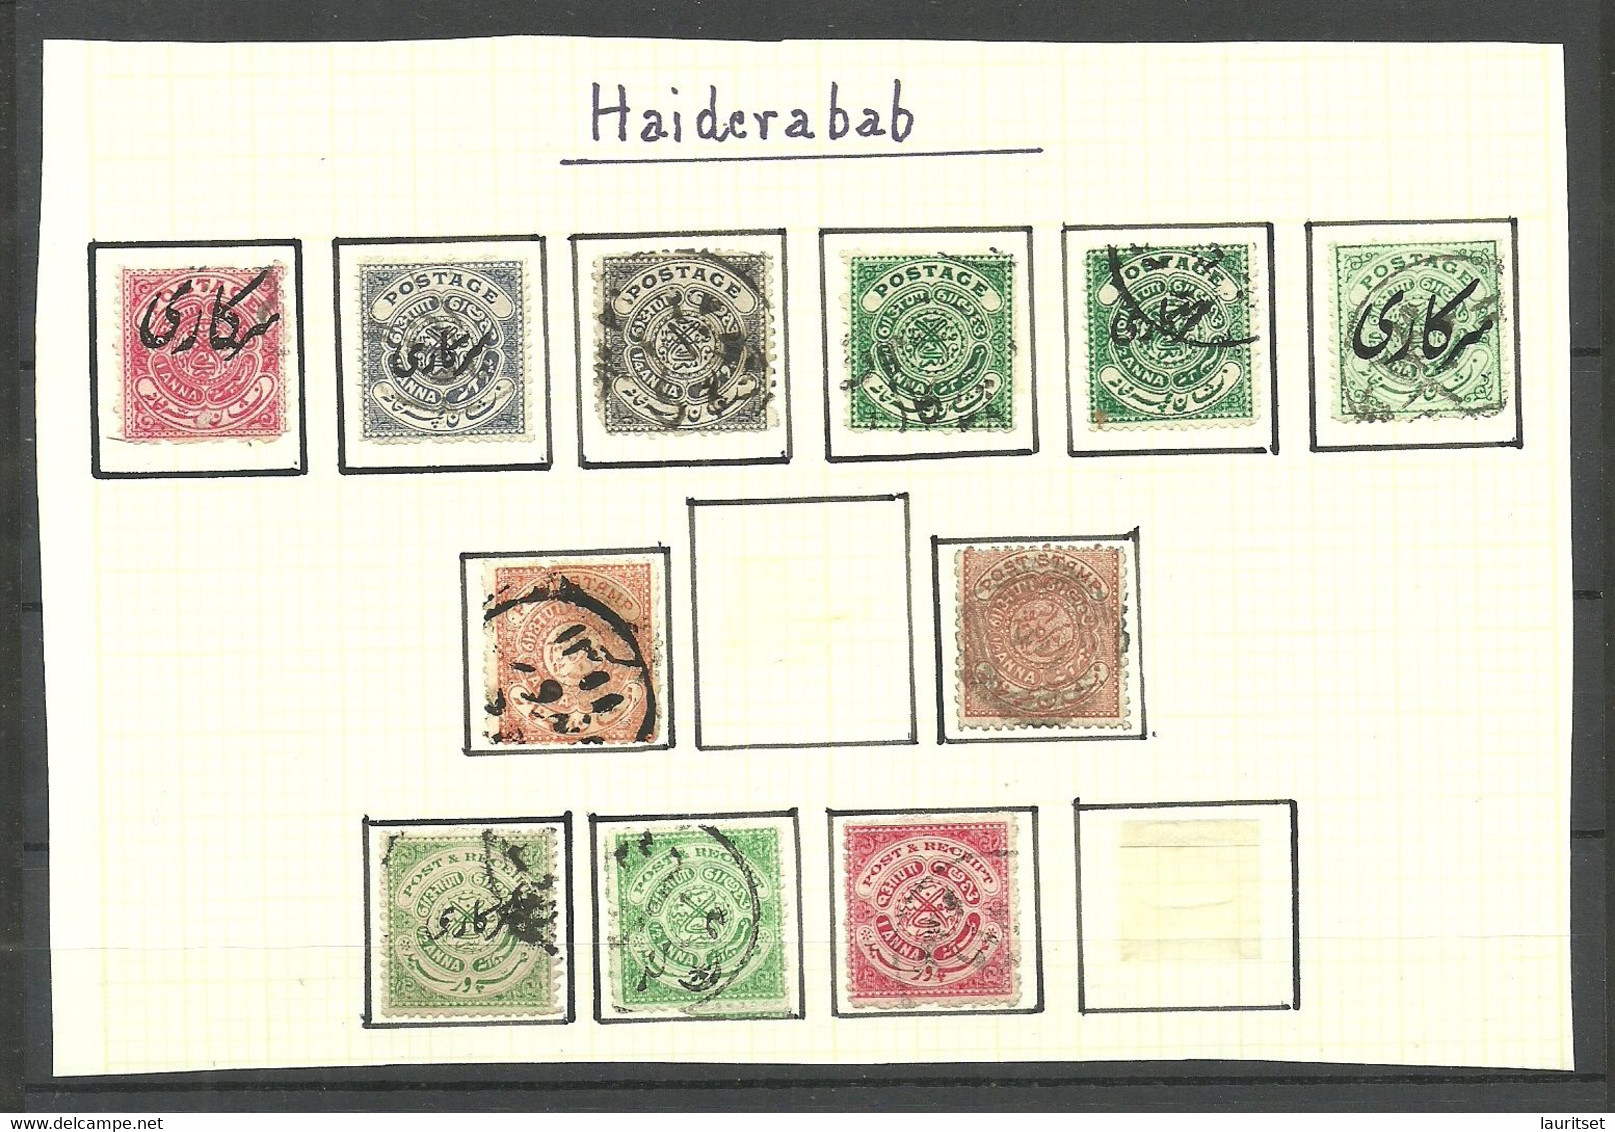 INDIA HAIDERABAD (Hyderabad) -  Small Lot Of 11 Stamps, O - Hyderabad